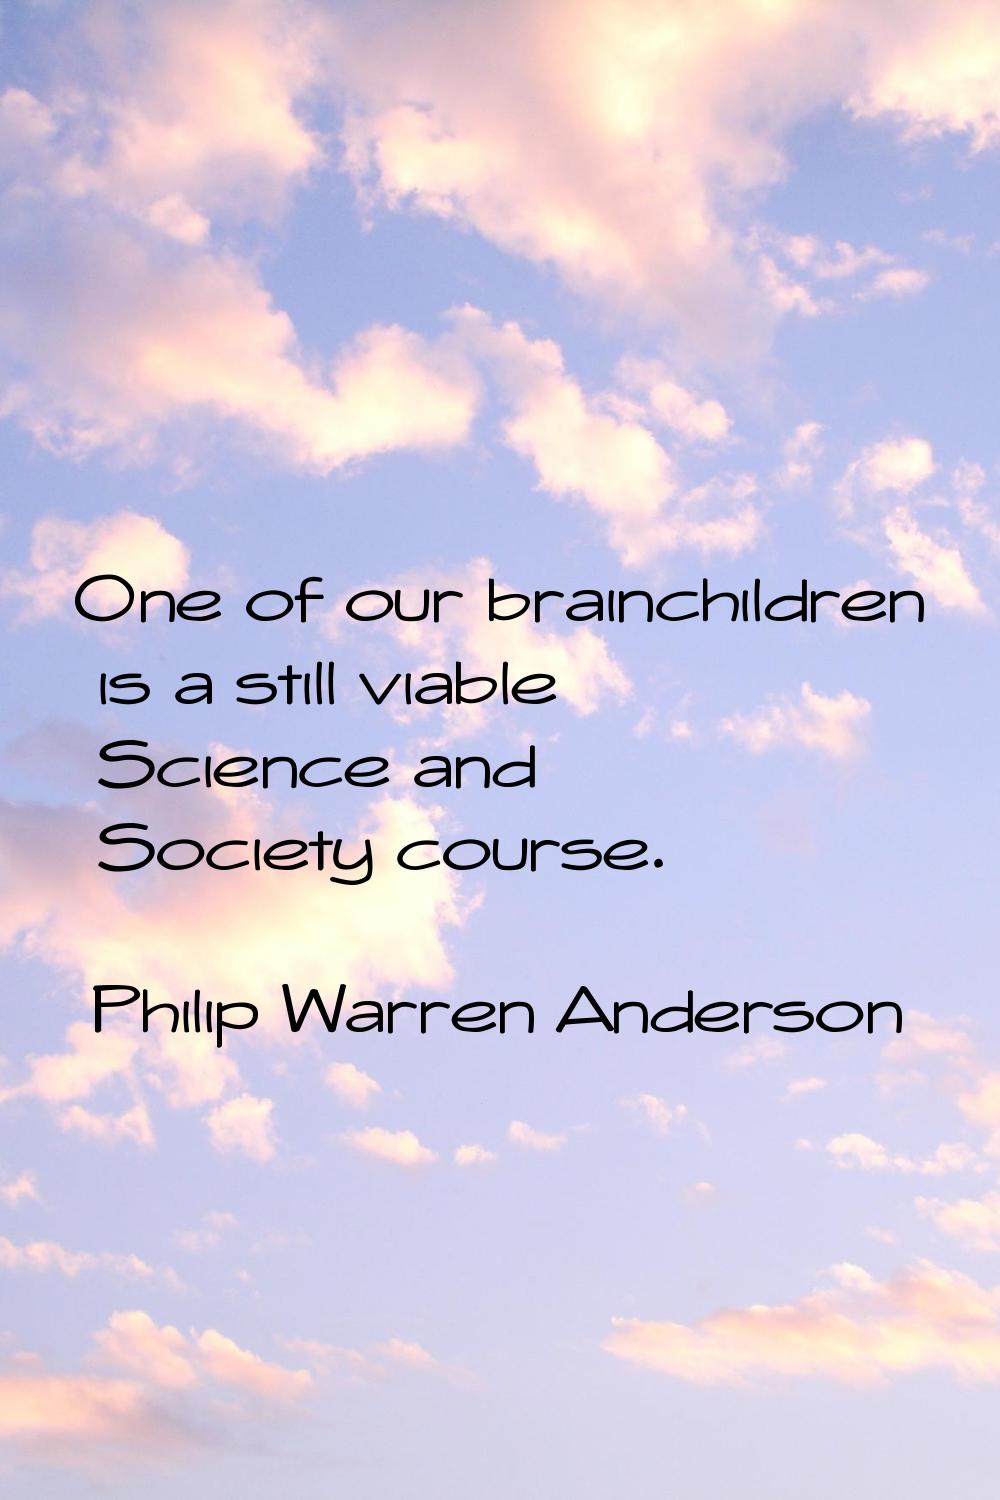 One of our brainchildren is a still viable Science and Society course.